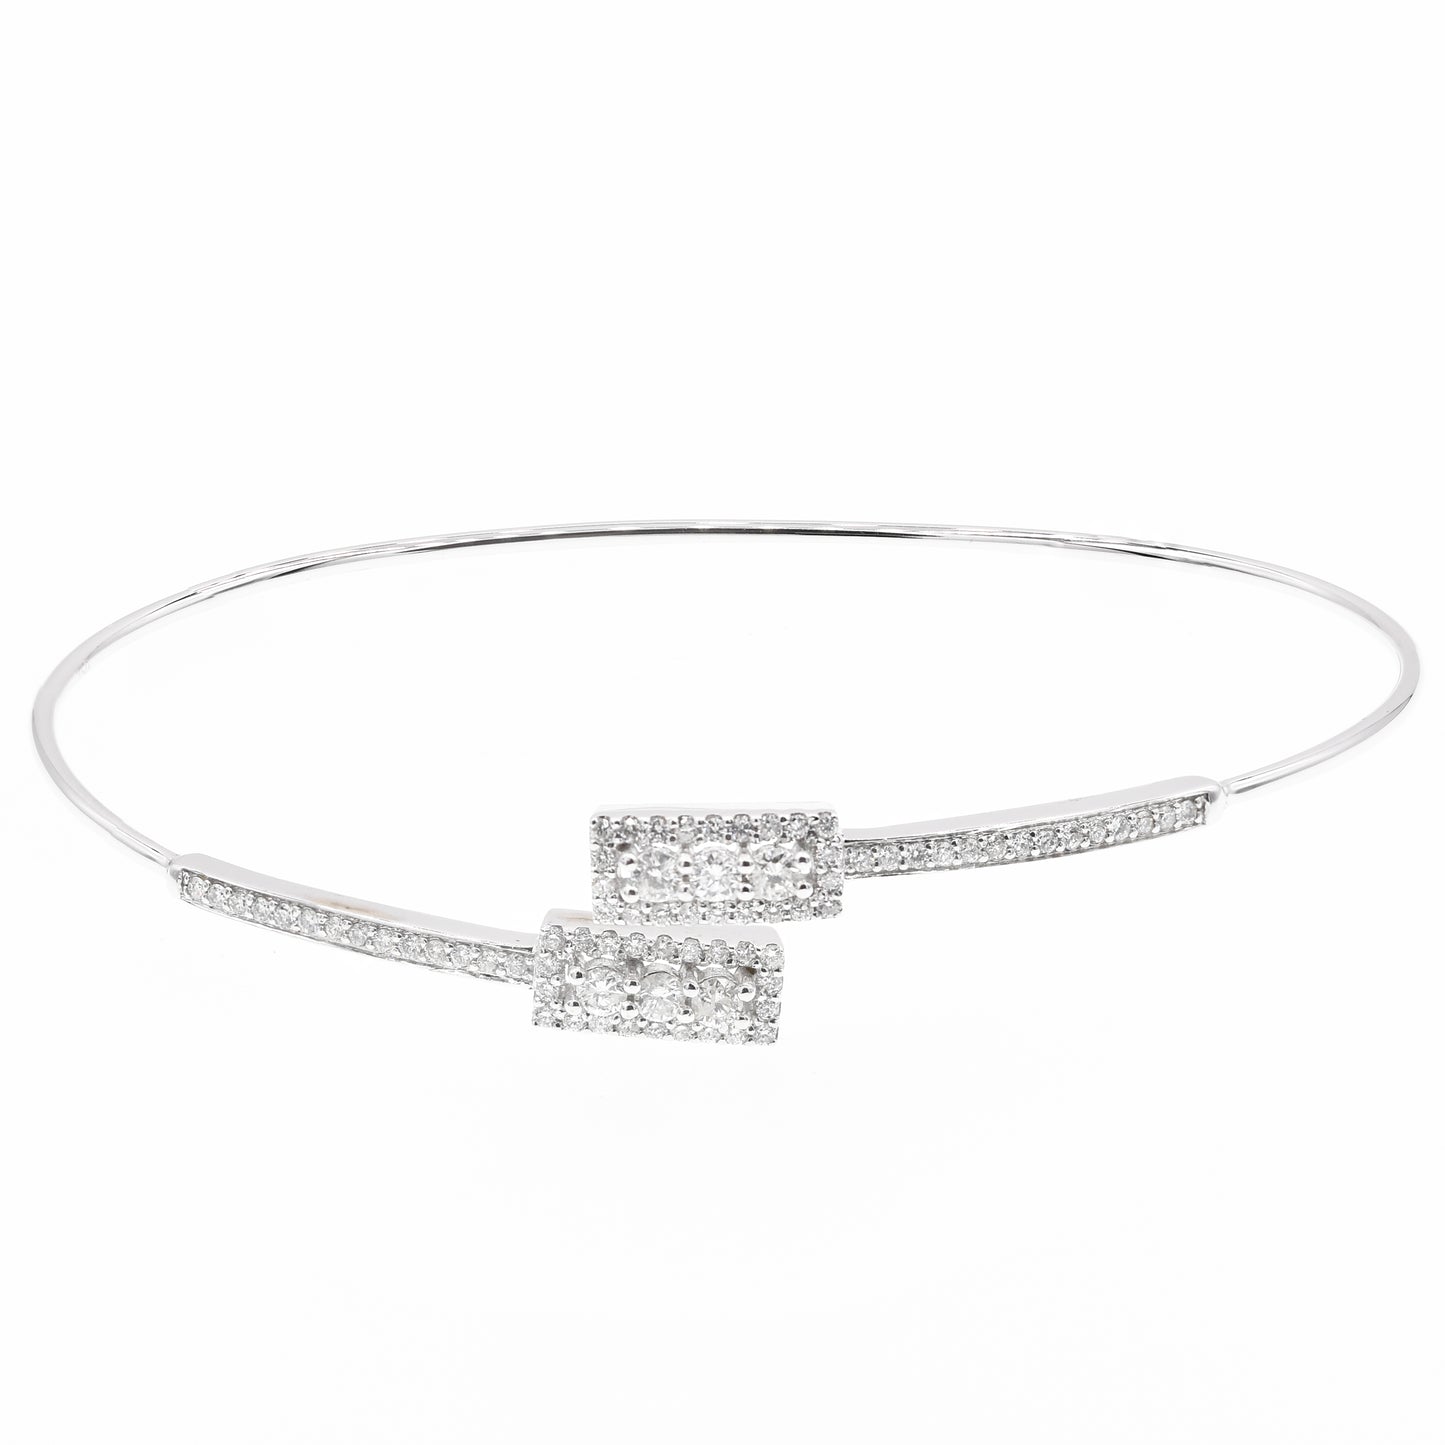 Monary Bracelet featuring 0.79 carats of Diamonds set in 18K White GOLD with 78 STONES